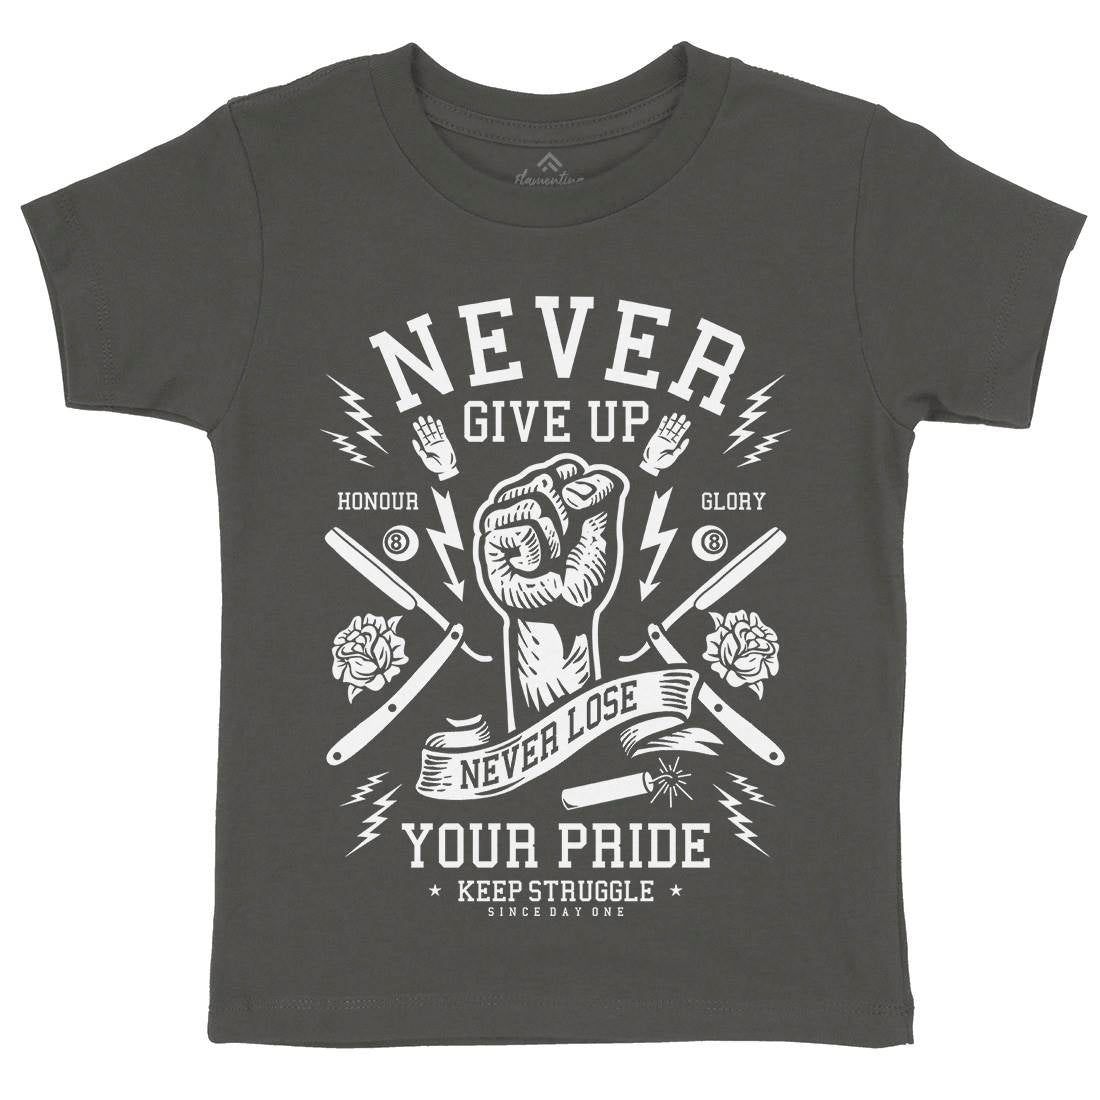 Never Give Up Kids Crew Neck T-Shirt Quotes A254